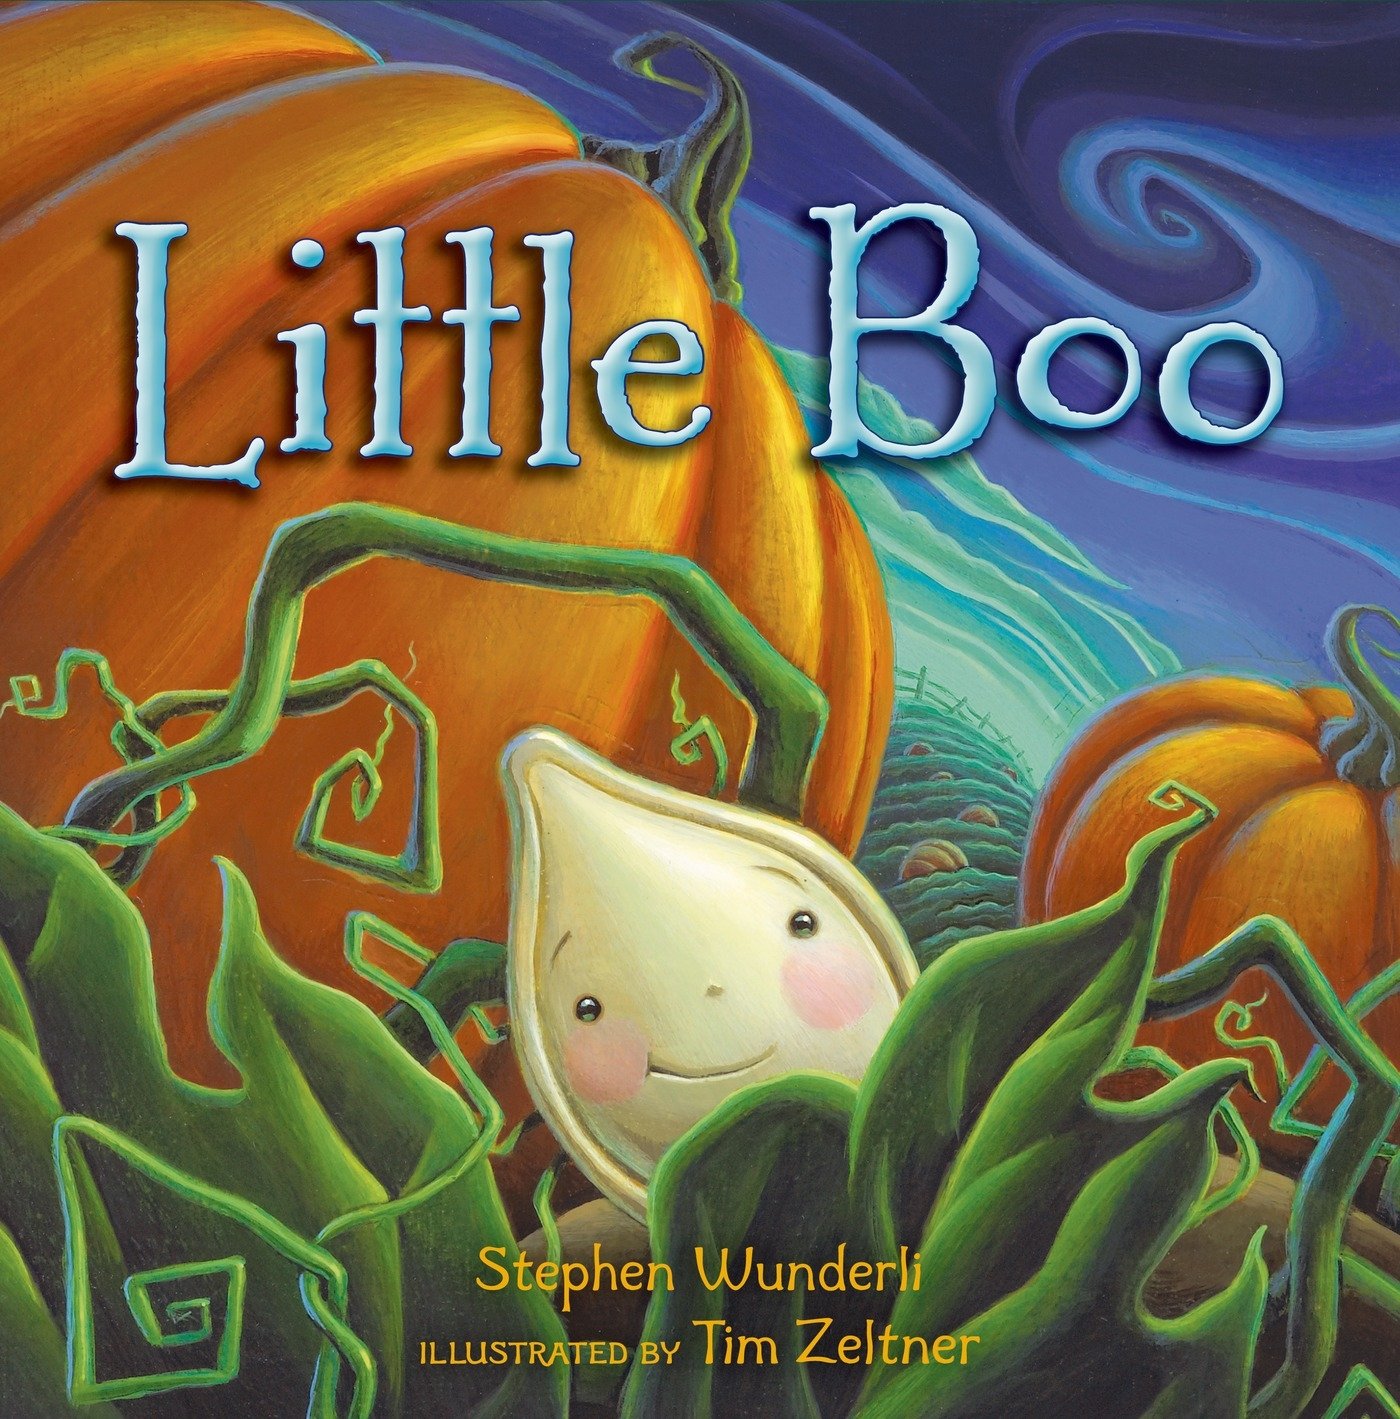 speech and language teaching concepts for little boo in speech therapy